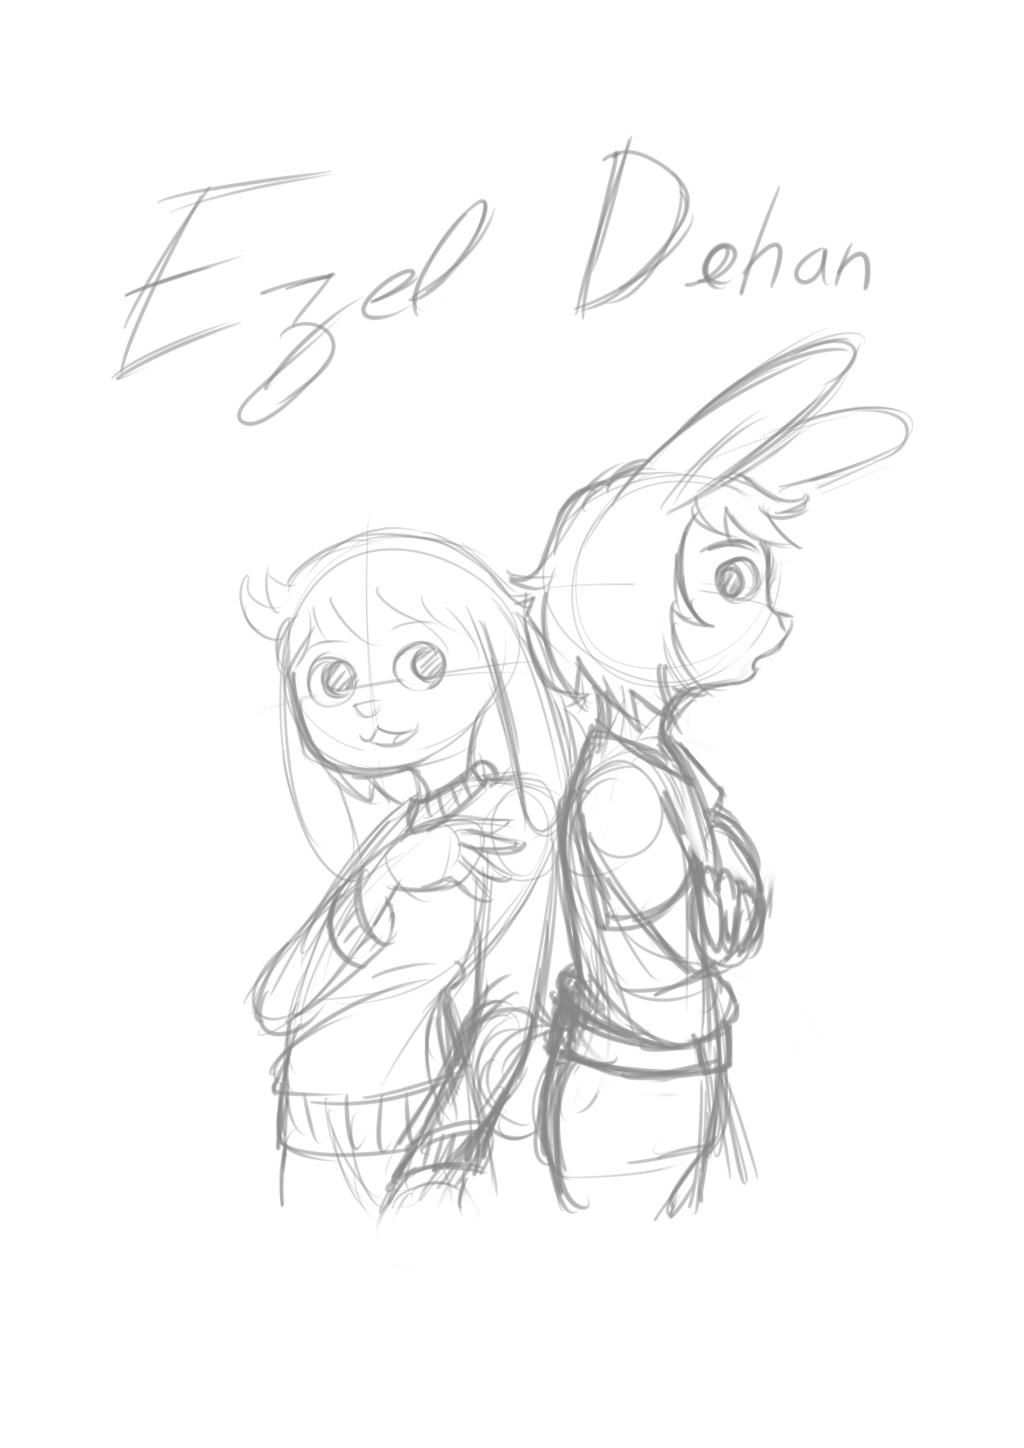 Ezel and Dehan (NSFW)